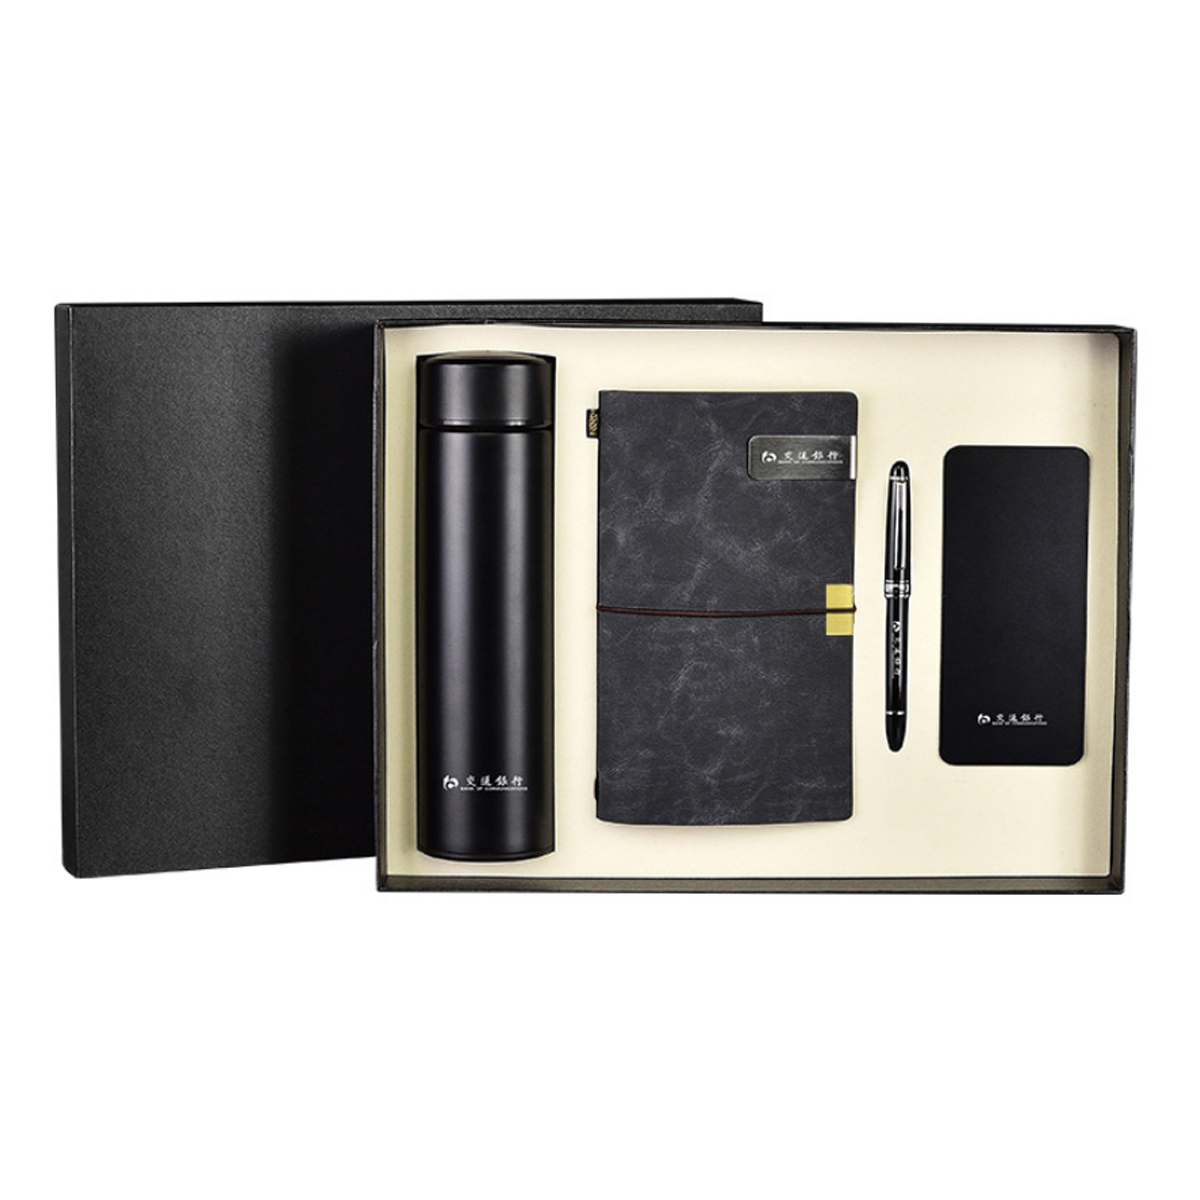 Power Bank, Notebook and Flask Gift Set